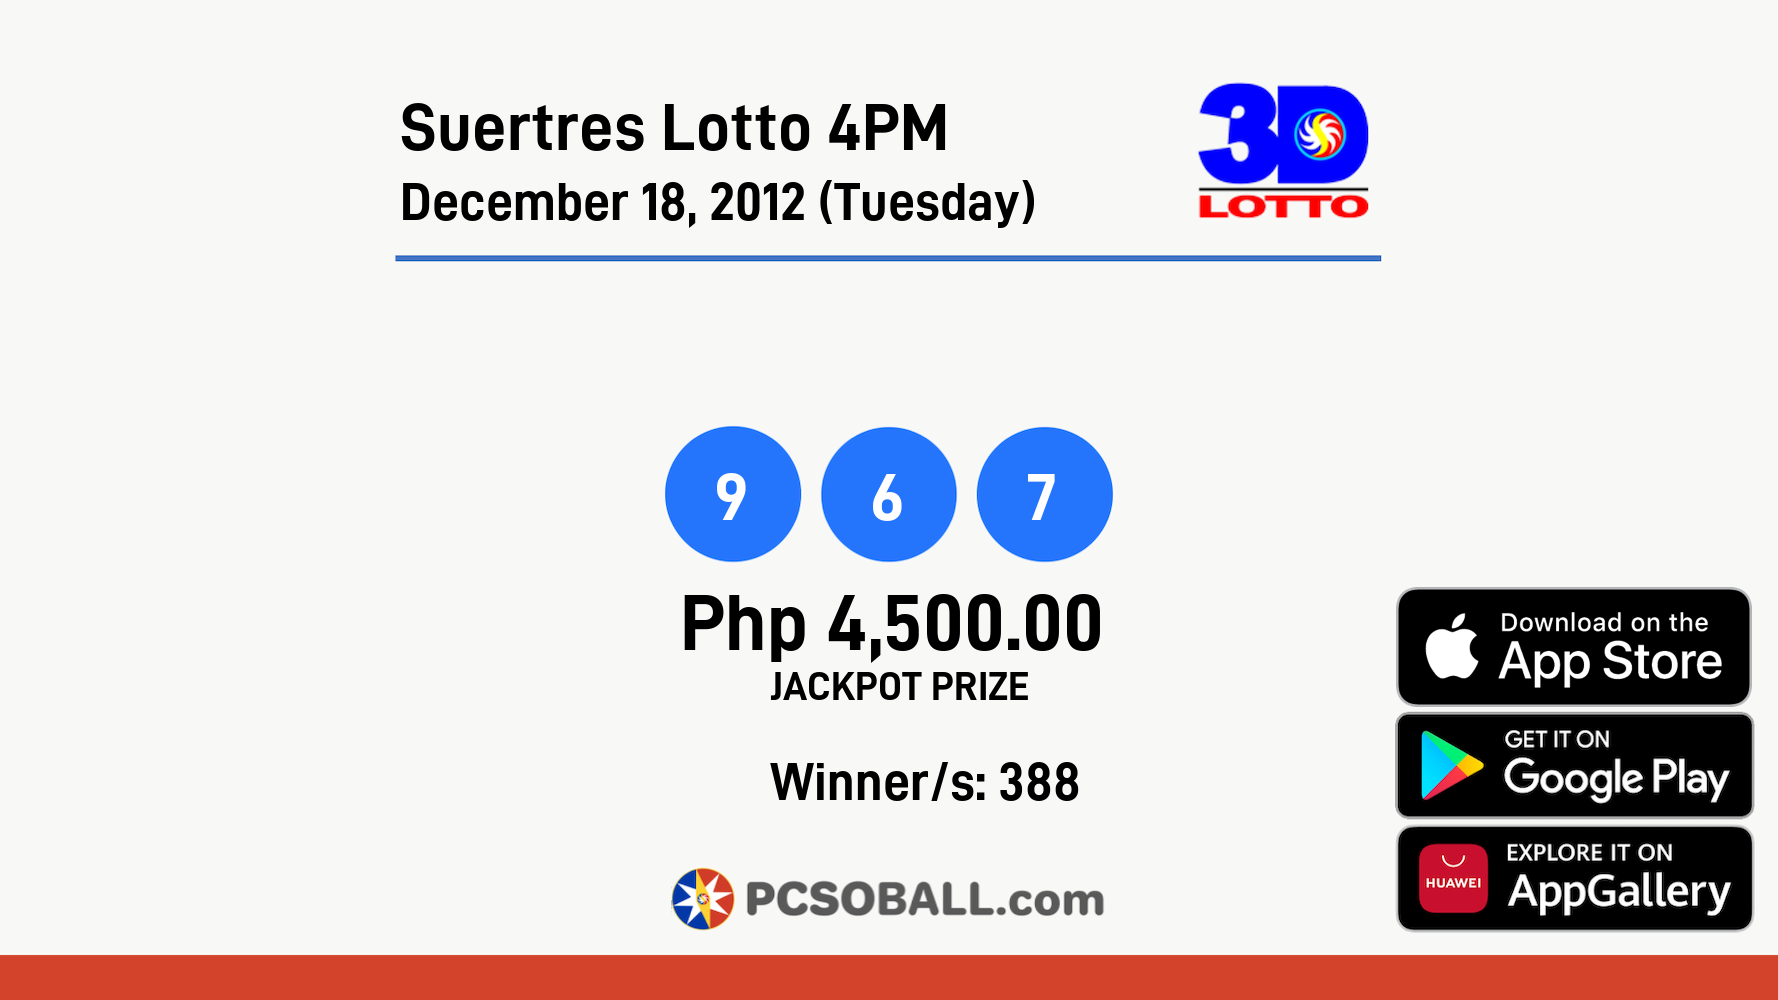 Suertres Lotto 4PM December 18, 2012 (Tuesday) Result